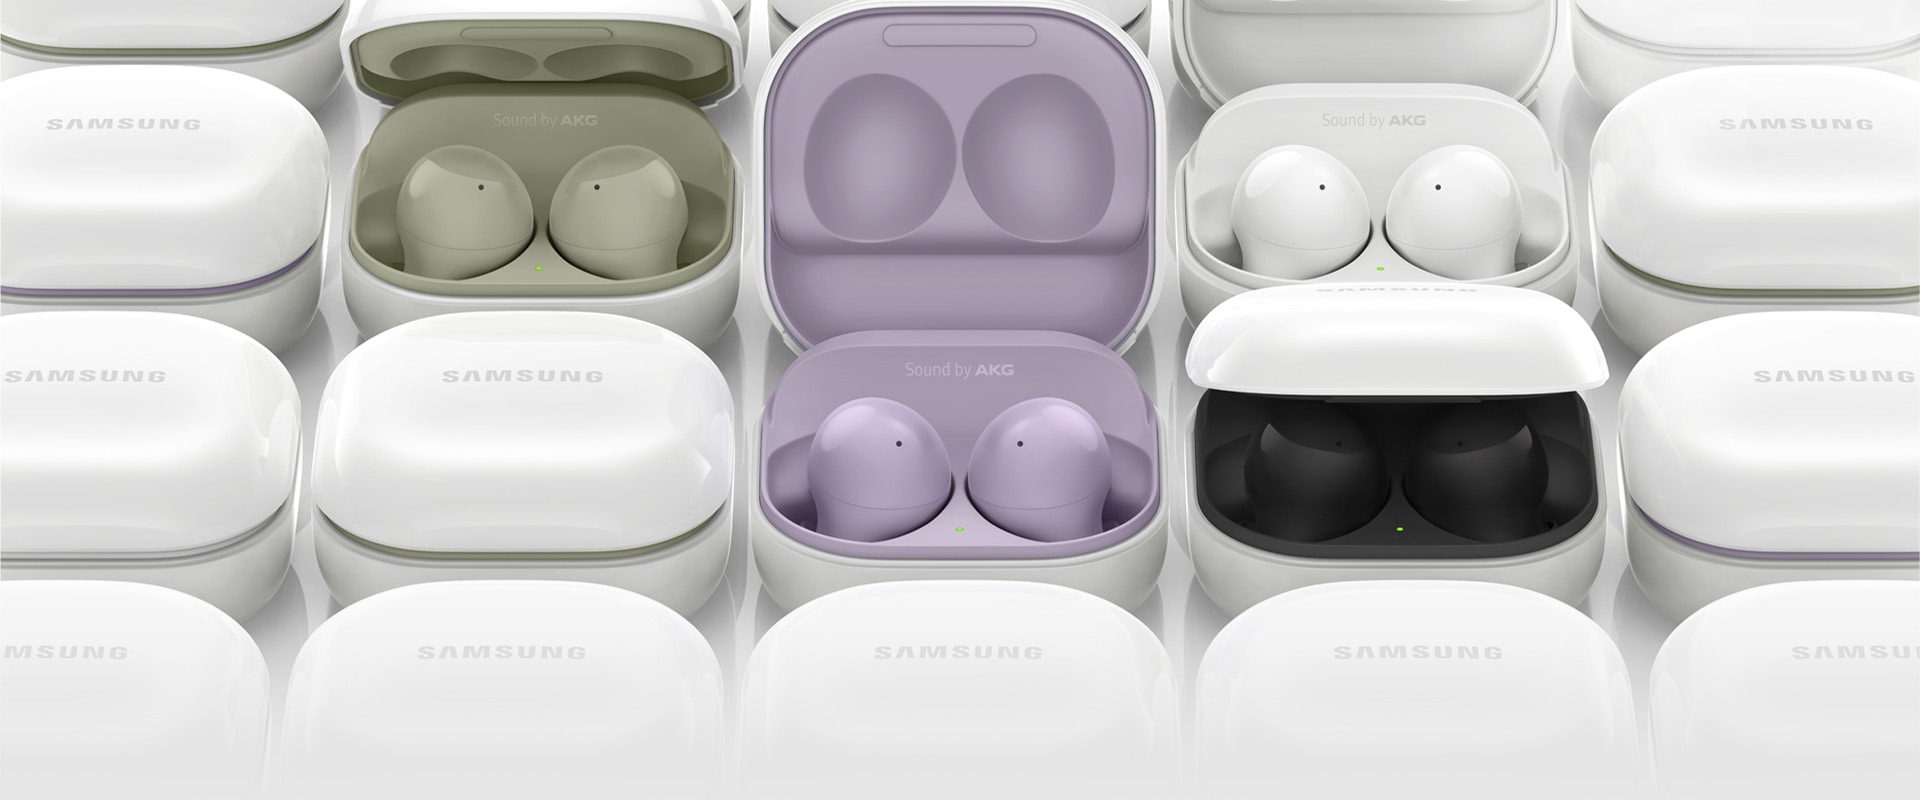 Samsung Galaxy Buds2, Active Noise Cancellation Earbuds, Shop Now